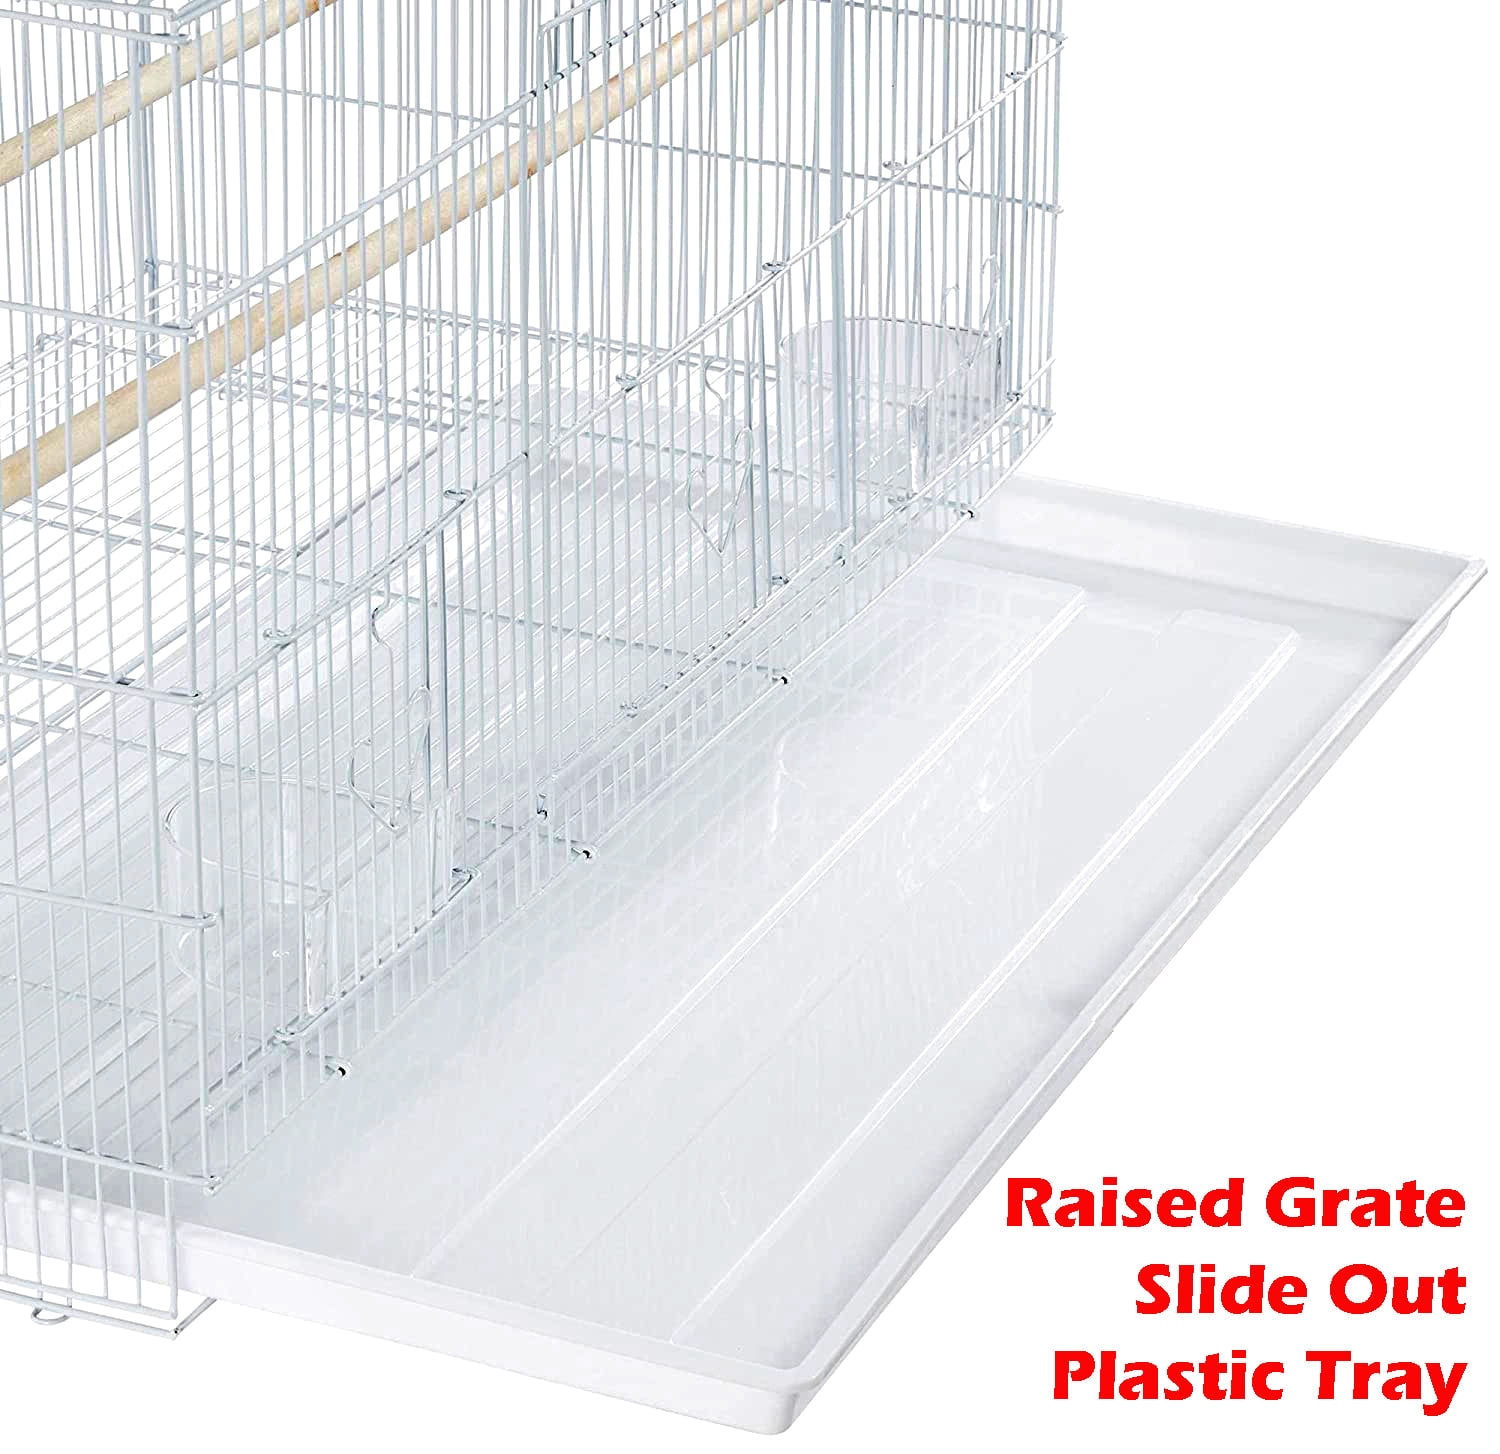 Lot of 4 Large 30" Bird Breeding Breeder Cages Divider 30x18x18"H With Stand 469 